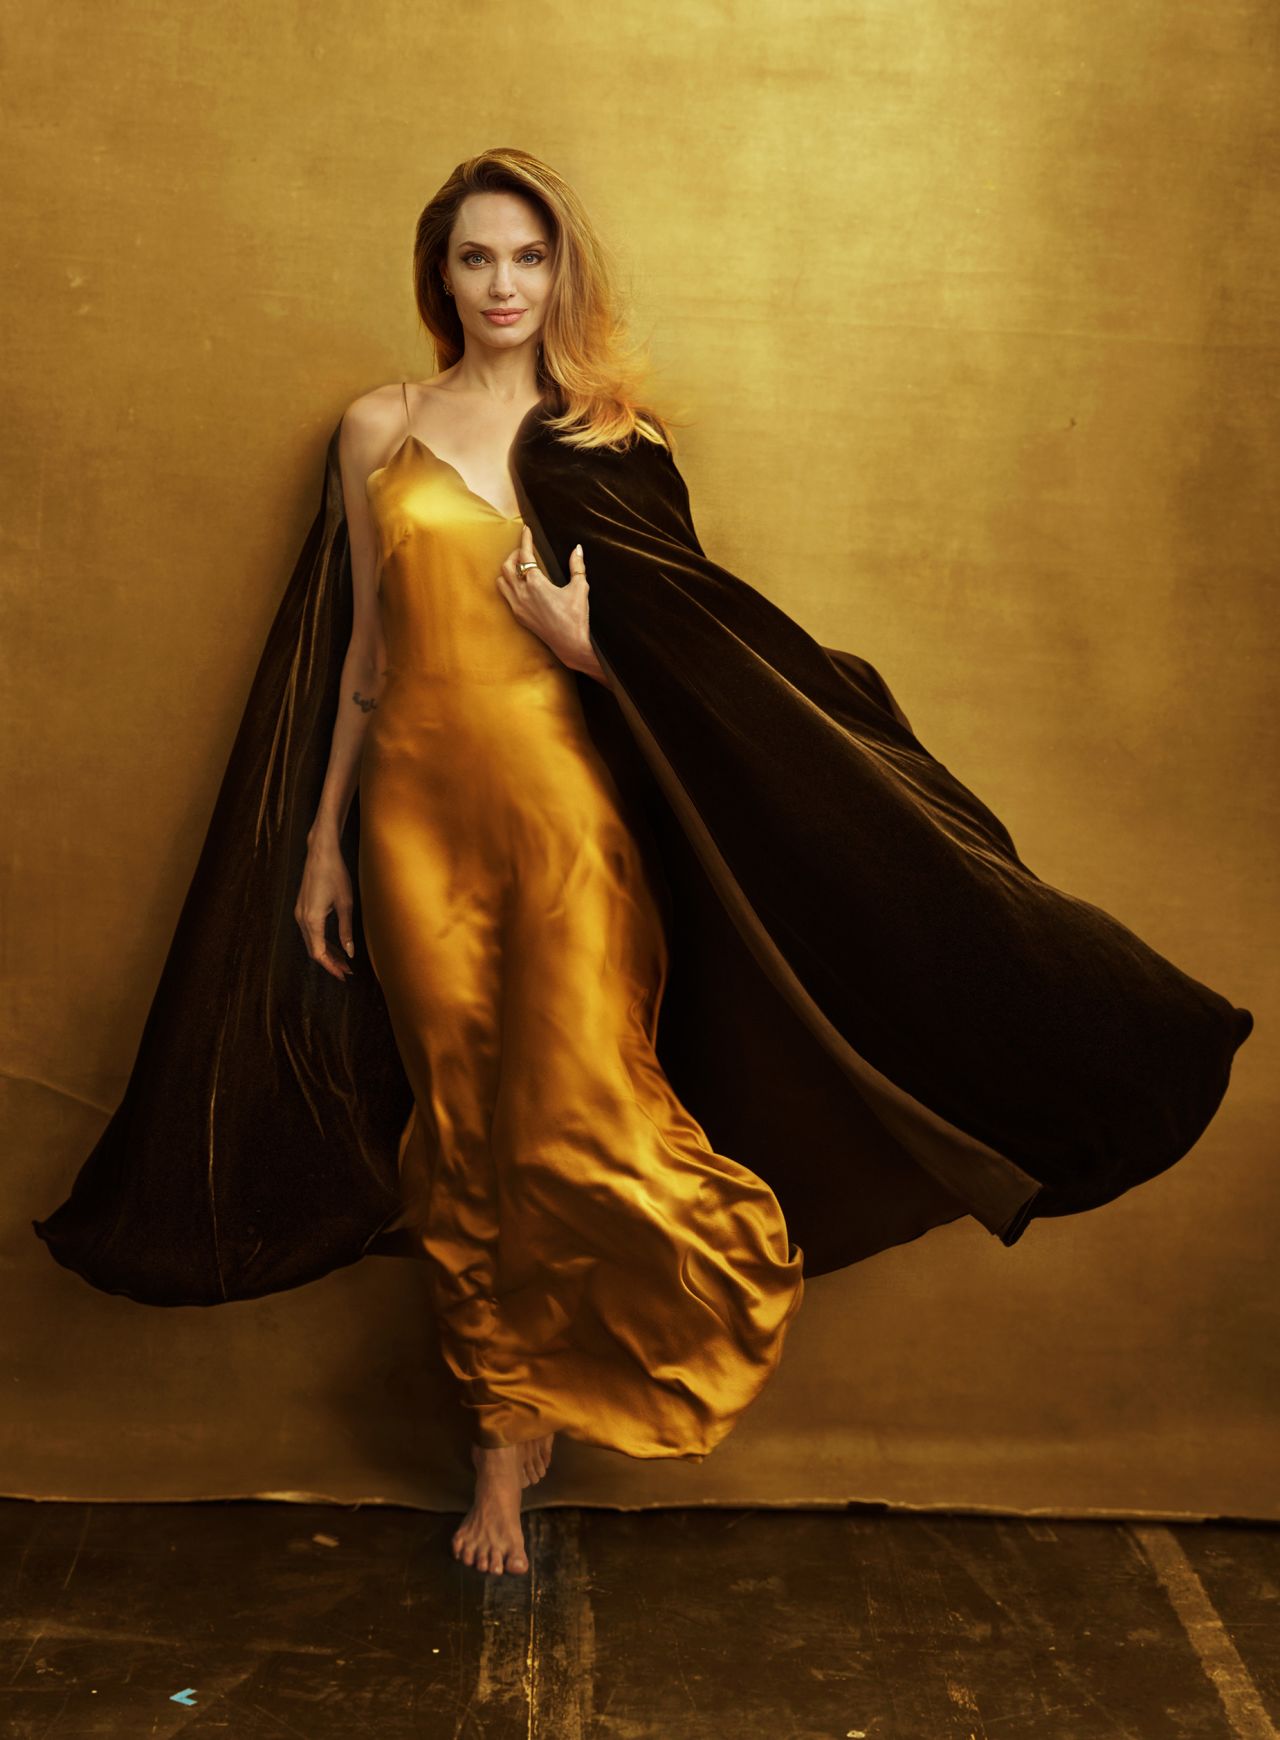 Jolie in a slip dress and velvet cape from Atelier Jolie. The actor and filmmaker worked closely with two of her children, Zahara and Pax, and the launch of the project.